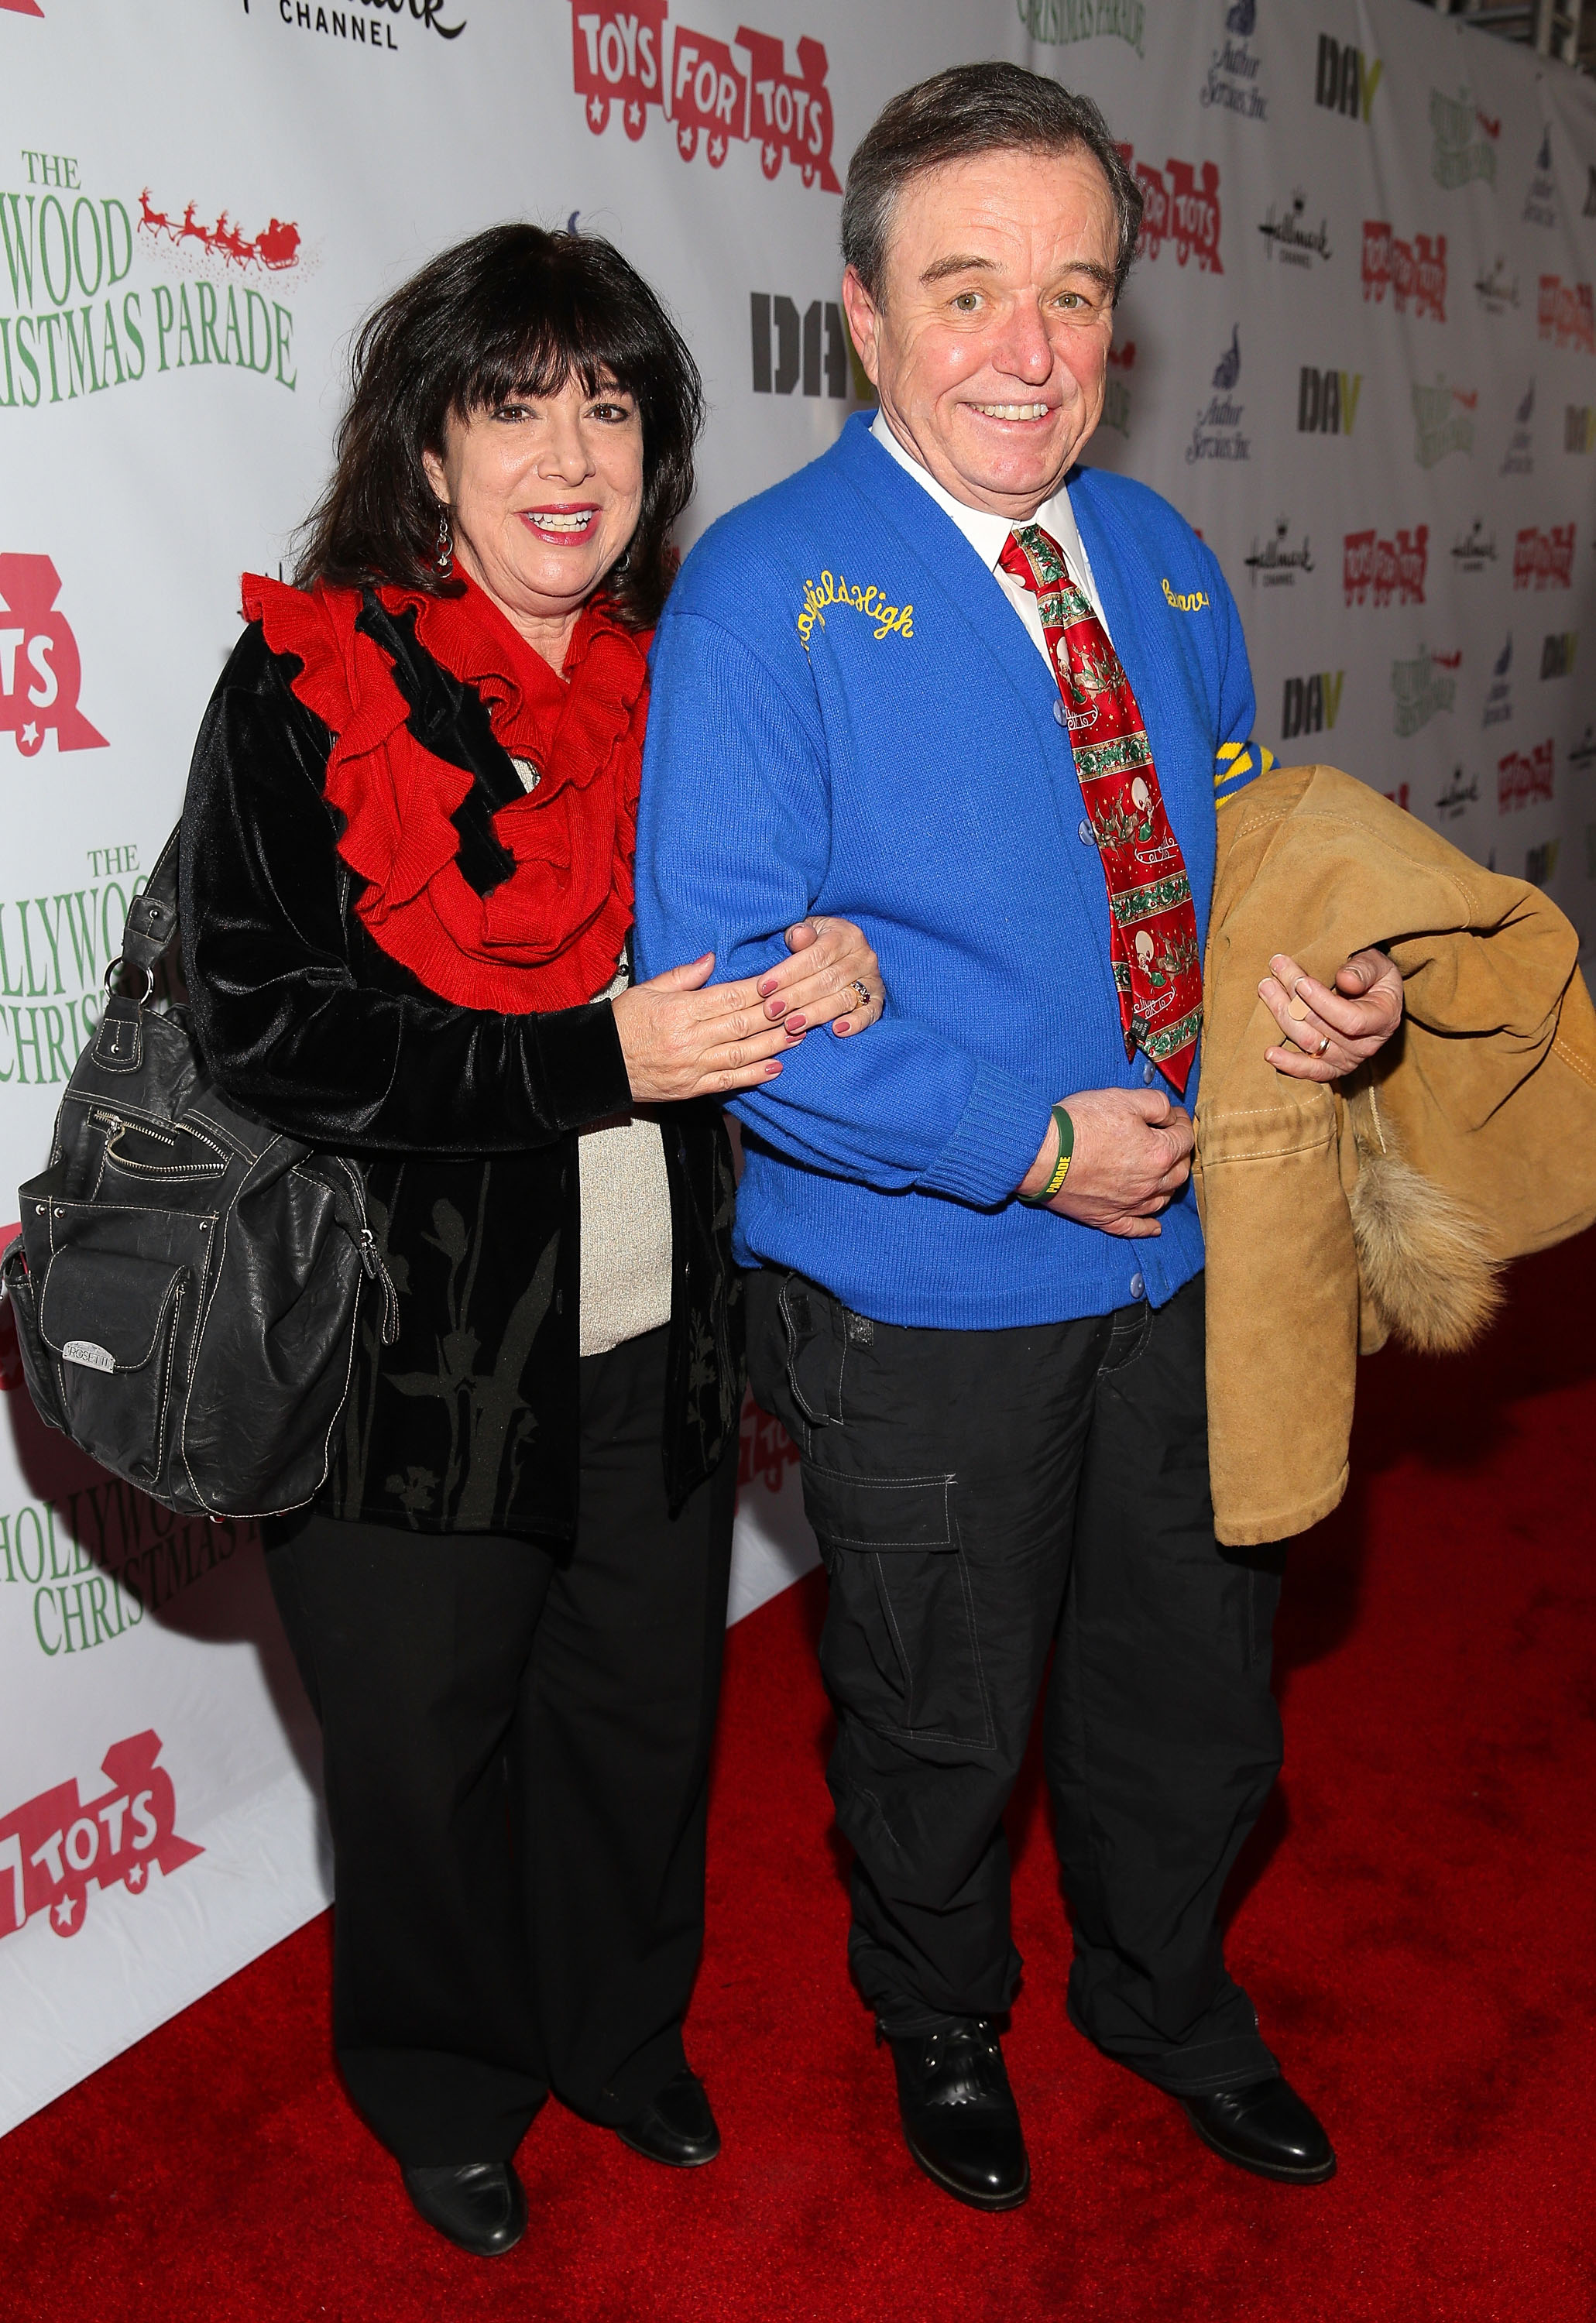 Teresa Modnick and Jerry Mathers at The Hollywood Christmas Parade benefiting the Toys For Tots Foundation in Hollywood, 2013 | Source: Getty Images